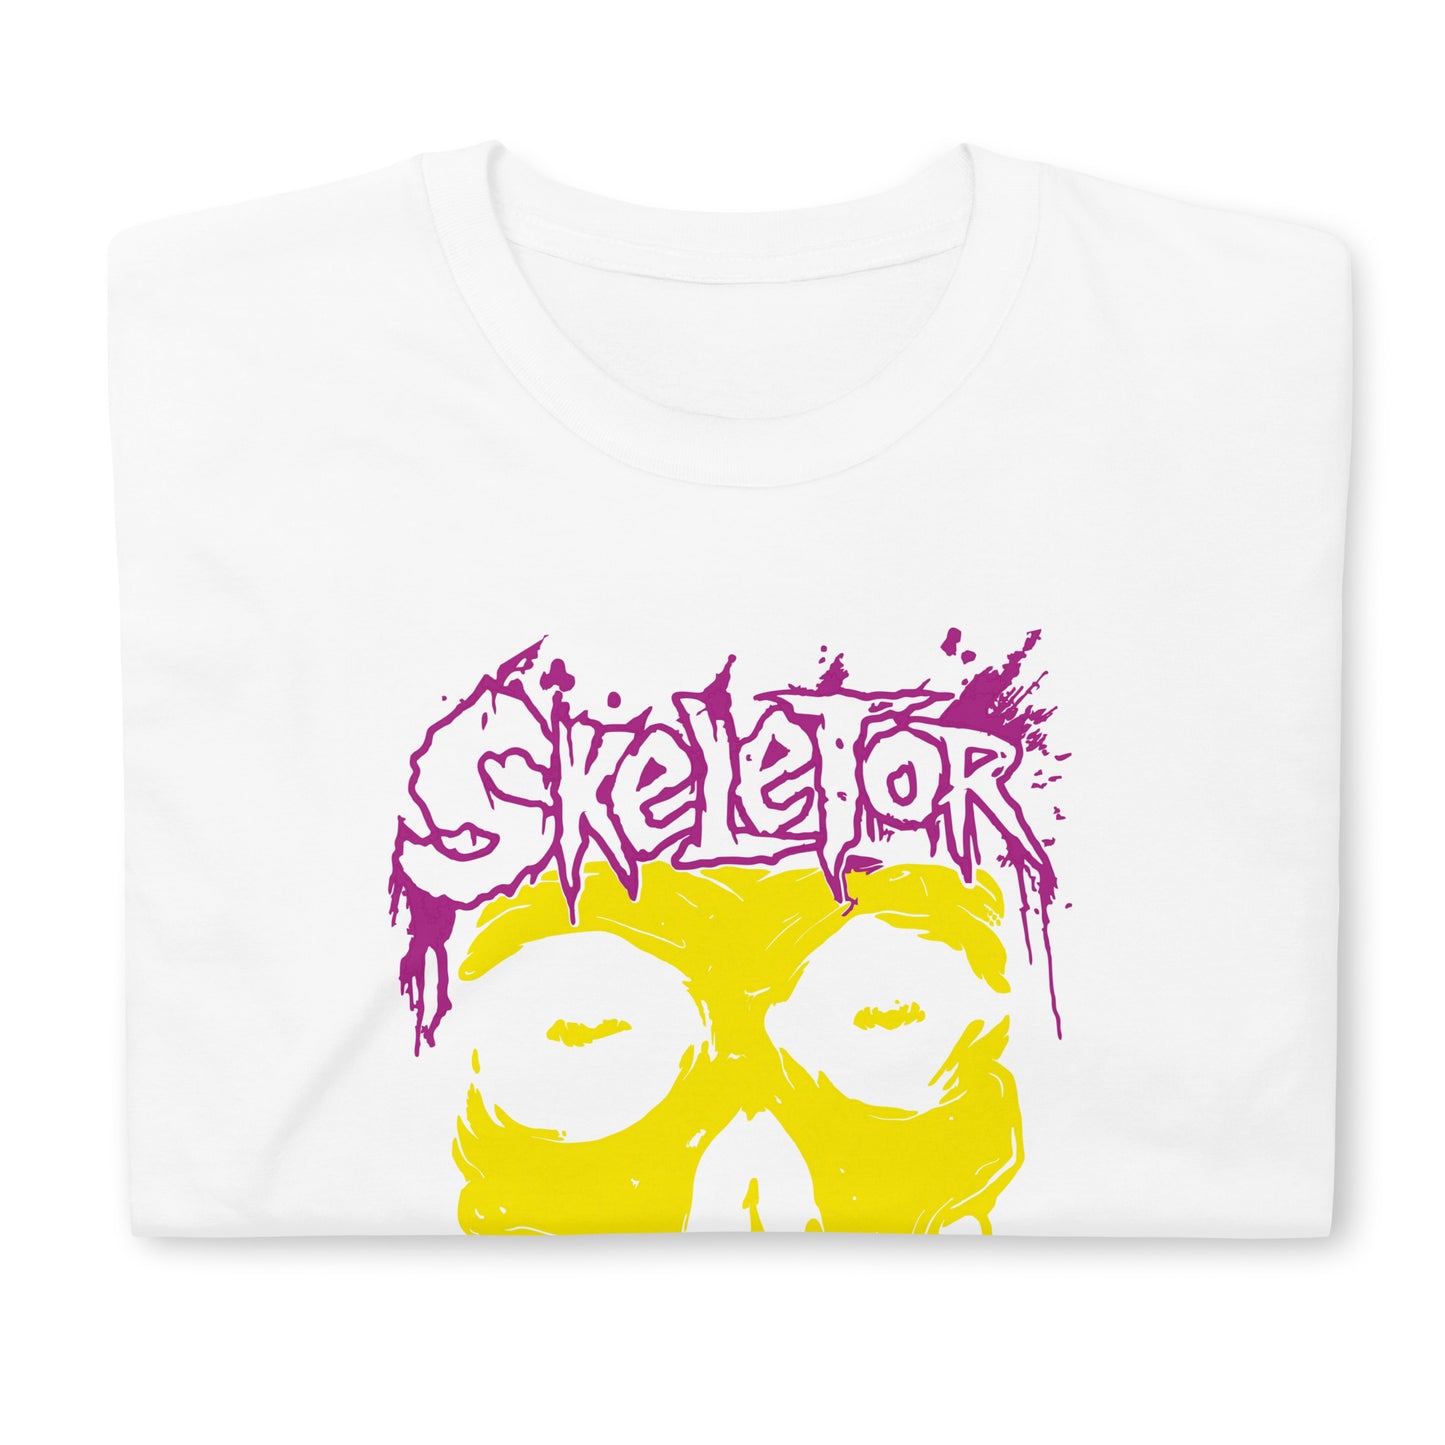 Skeletor T-Shirt, Masters of the Universe.